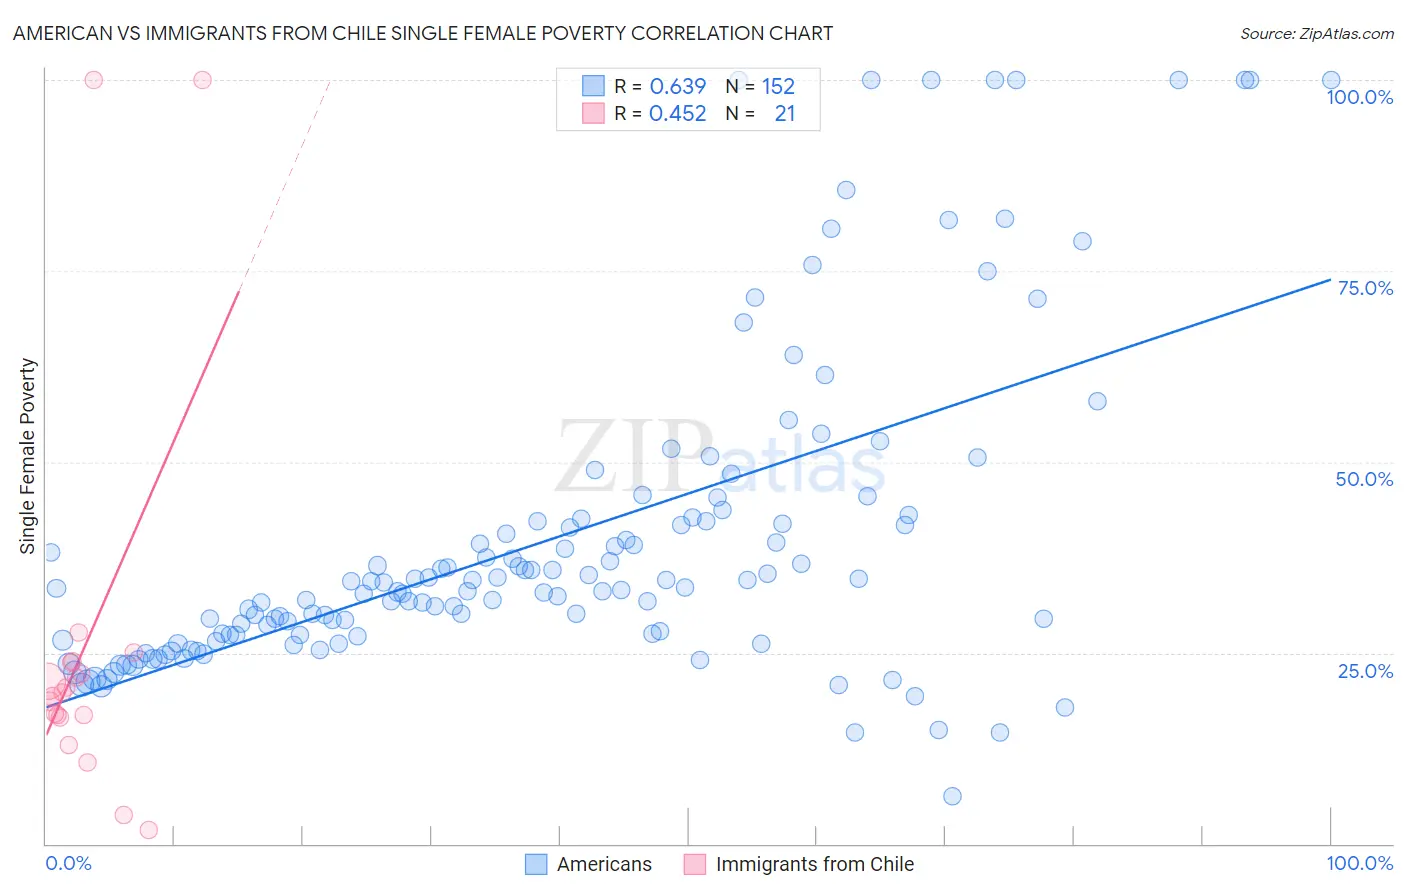 American vs Immigrants from Chile Single Female Poverty